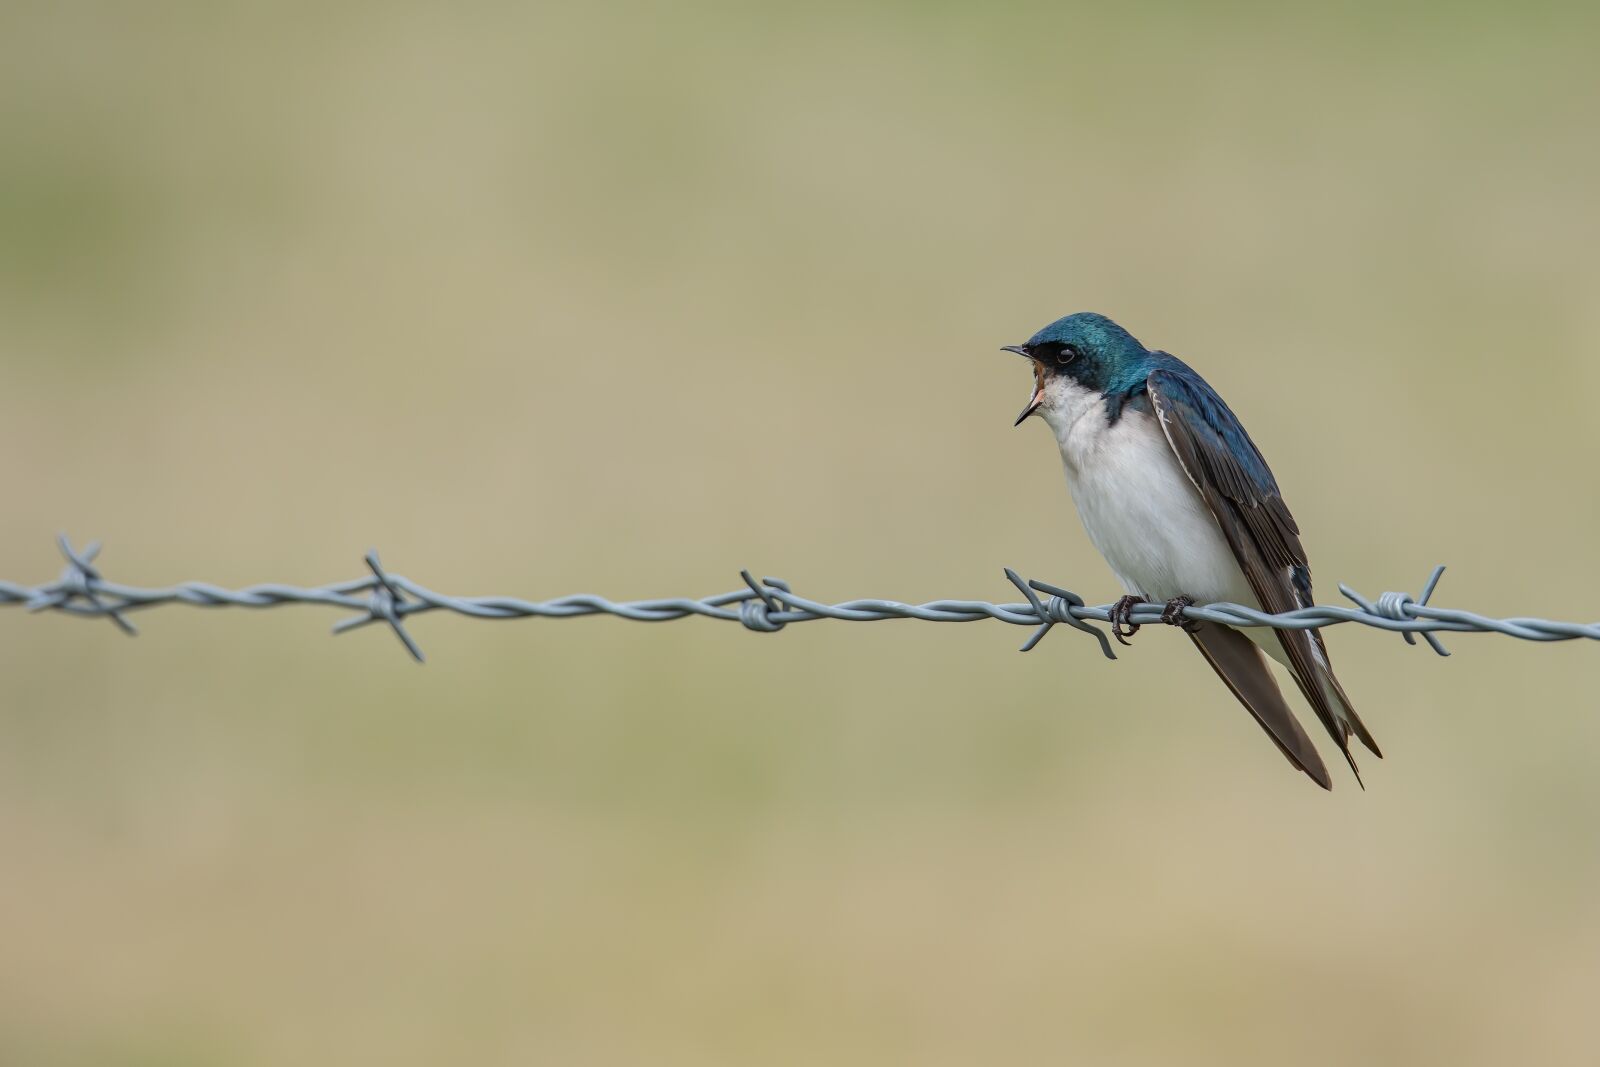 Sony a7 III sample photo. Bird, barbed wire, fence photography